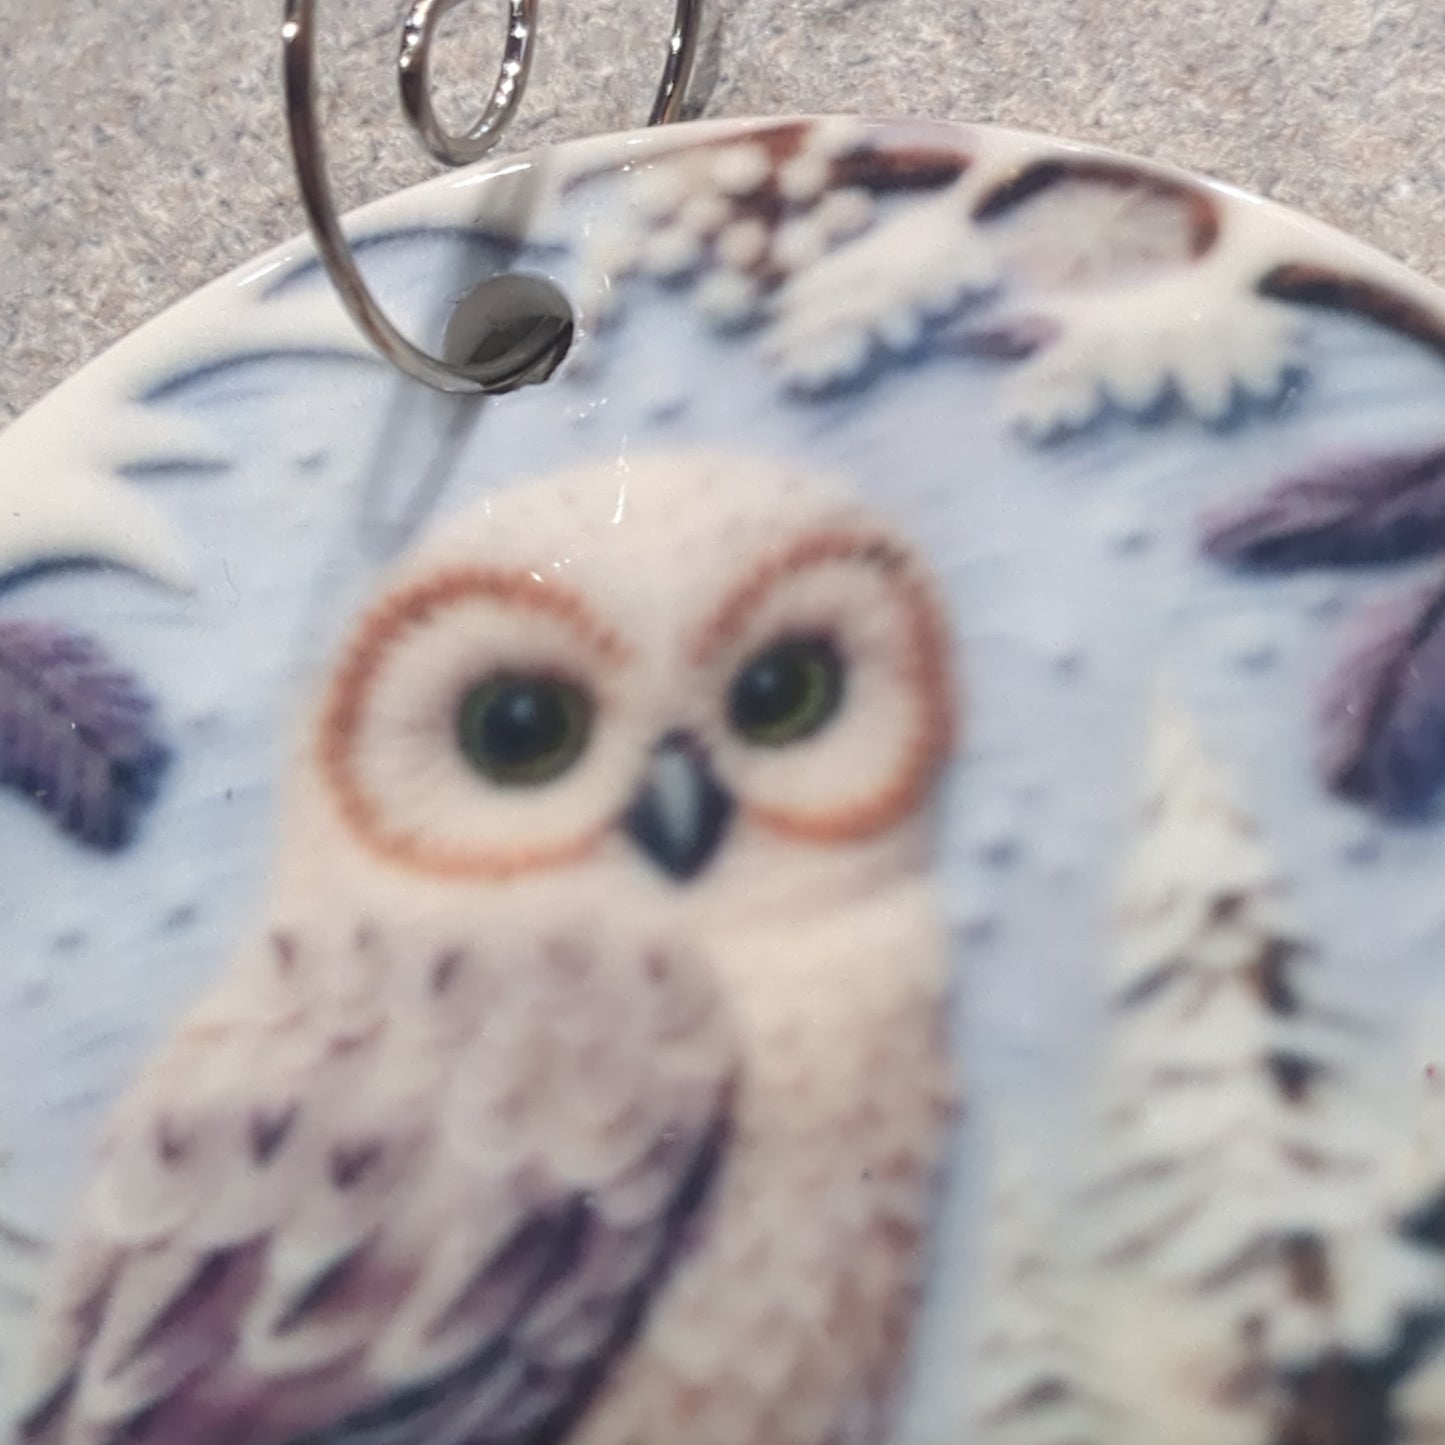 Ceramic ornament with an owl sitting on a branch, it appears 3D but it is not